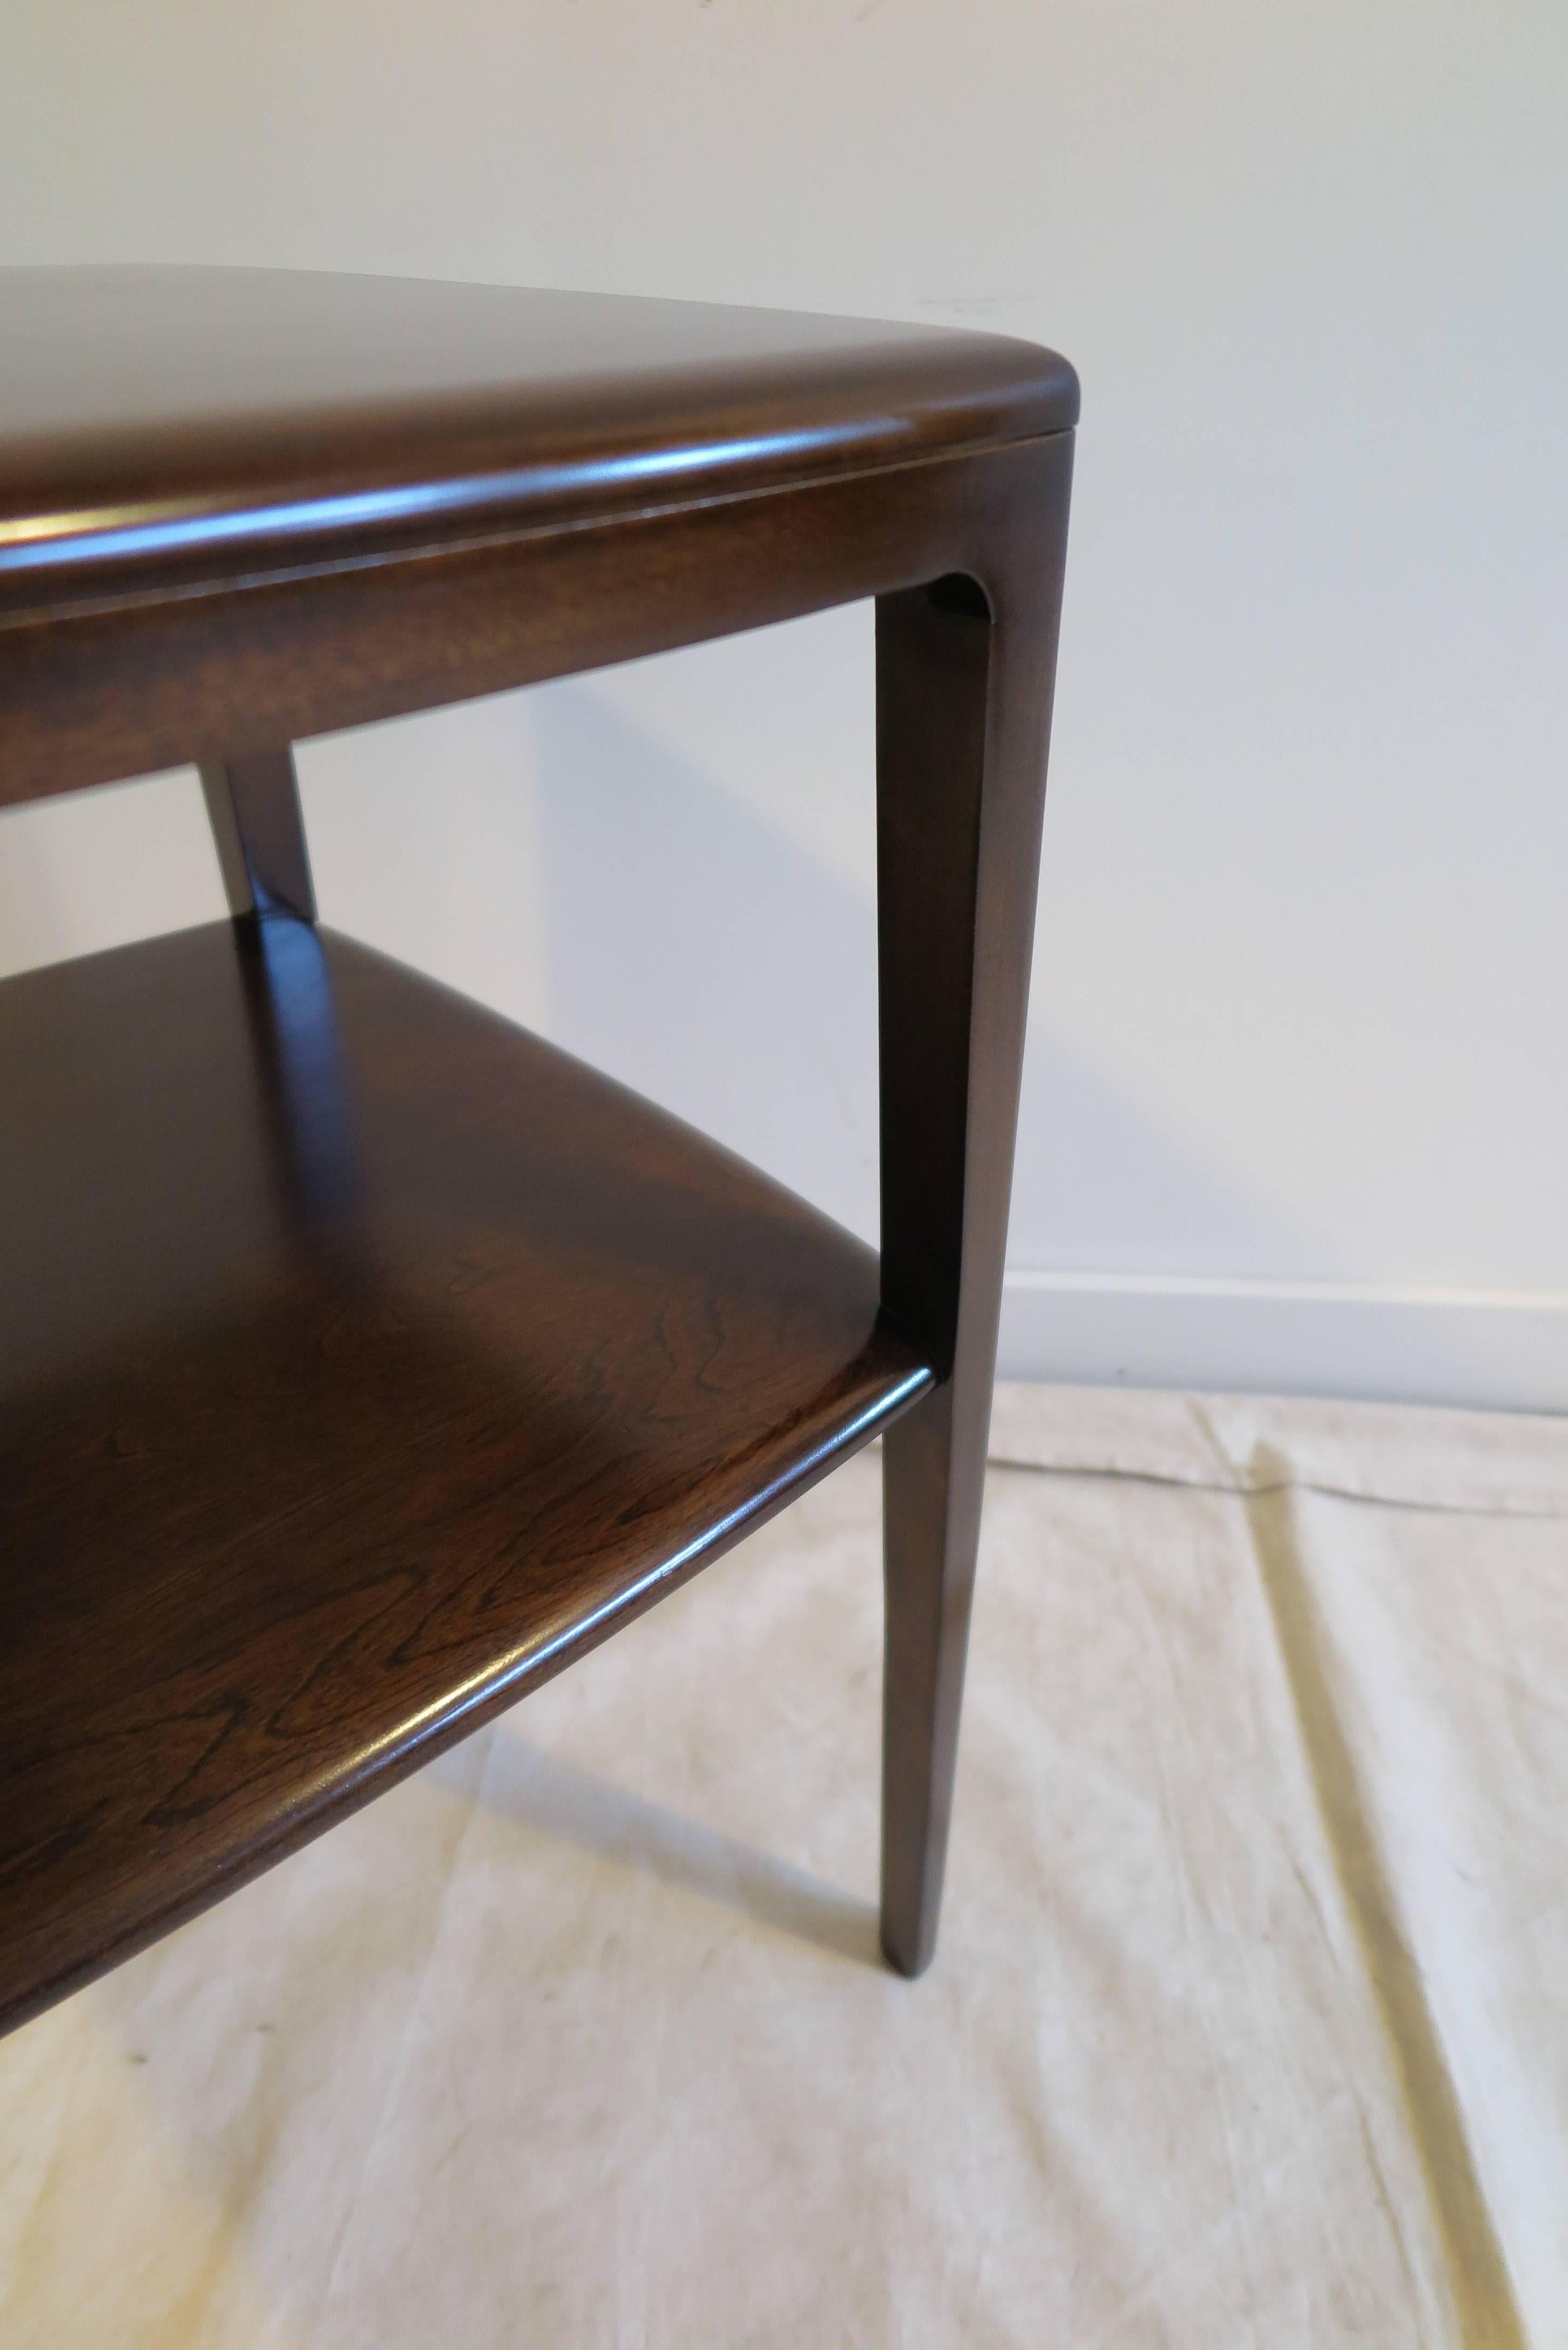 Heywood Wakefield waterfall edge side table. Solid maple with walnut finish, having a lower shelf. America 1955 very good condition. 